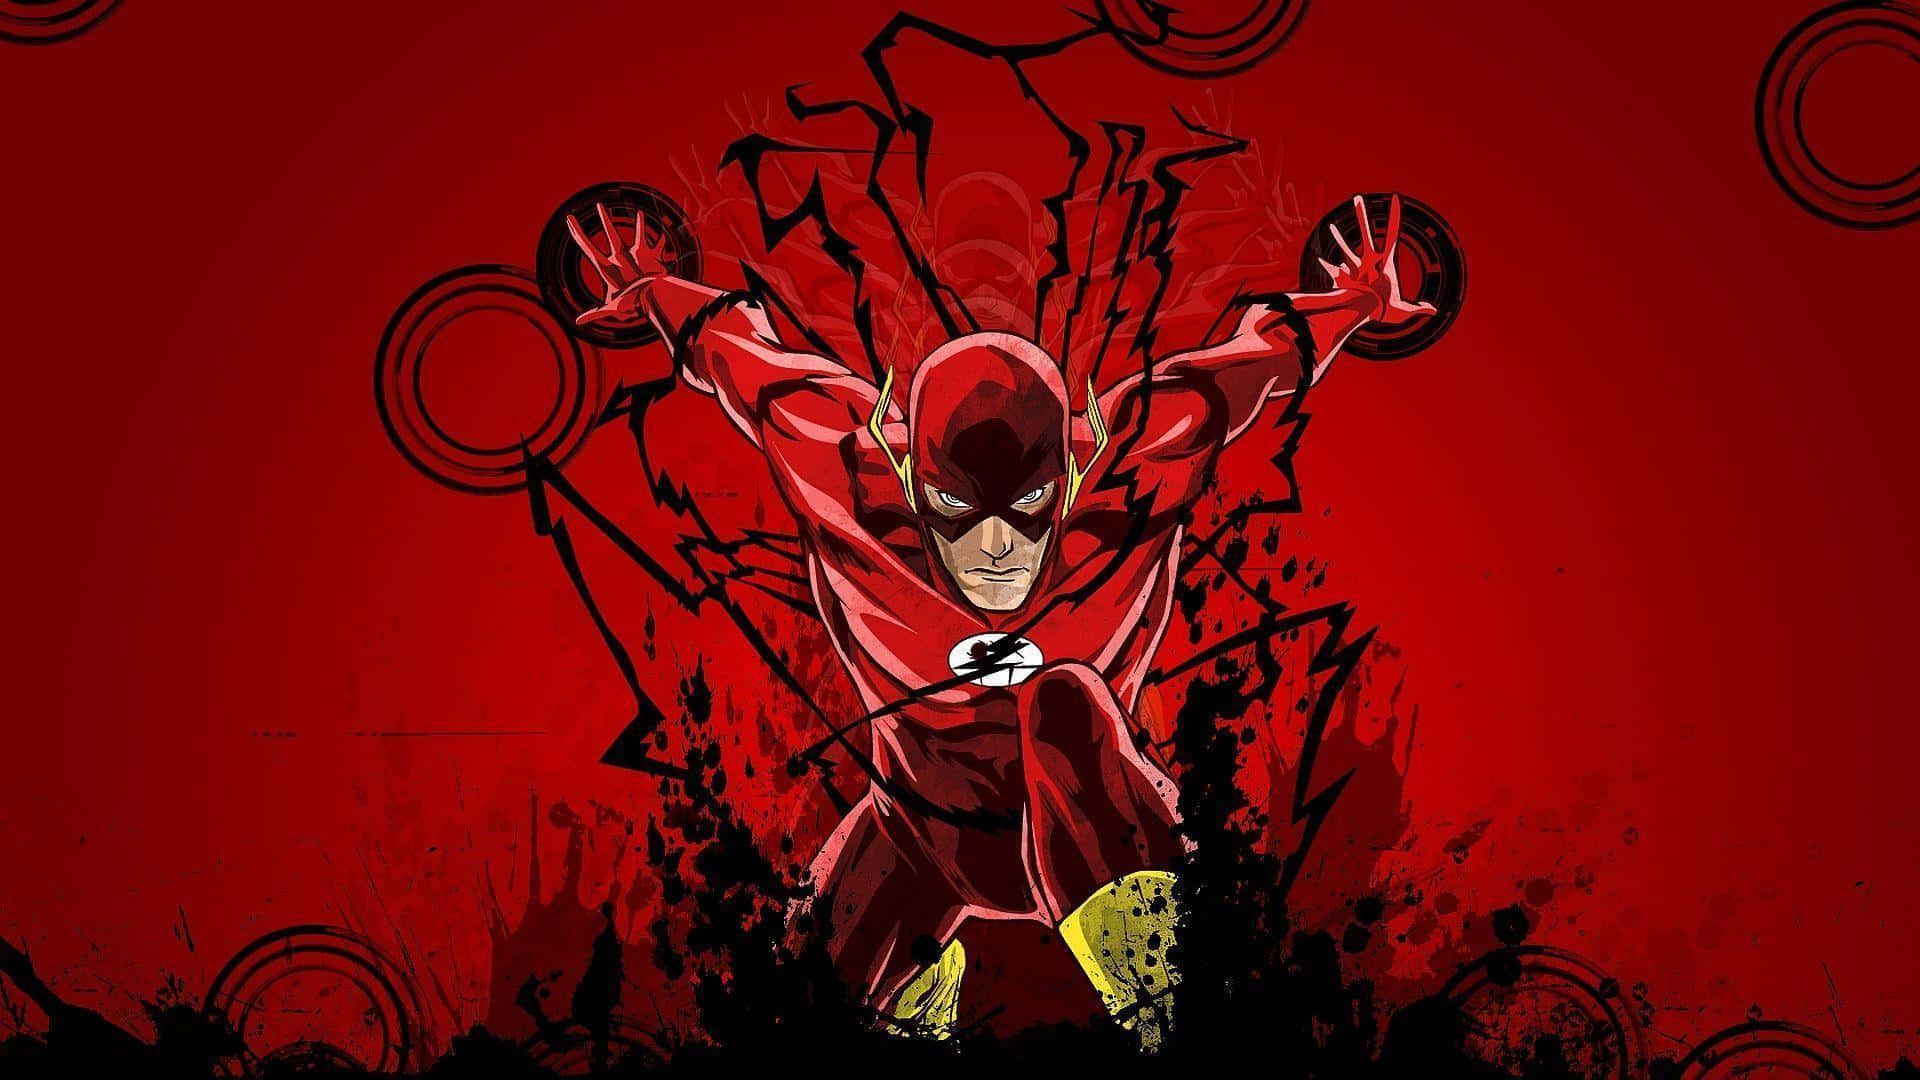 Come join The Flash on his journeys!